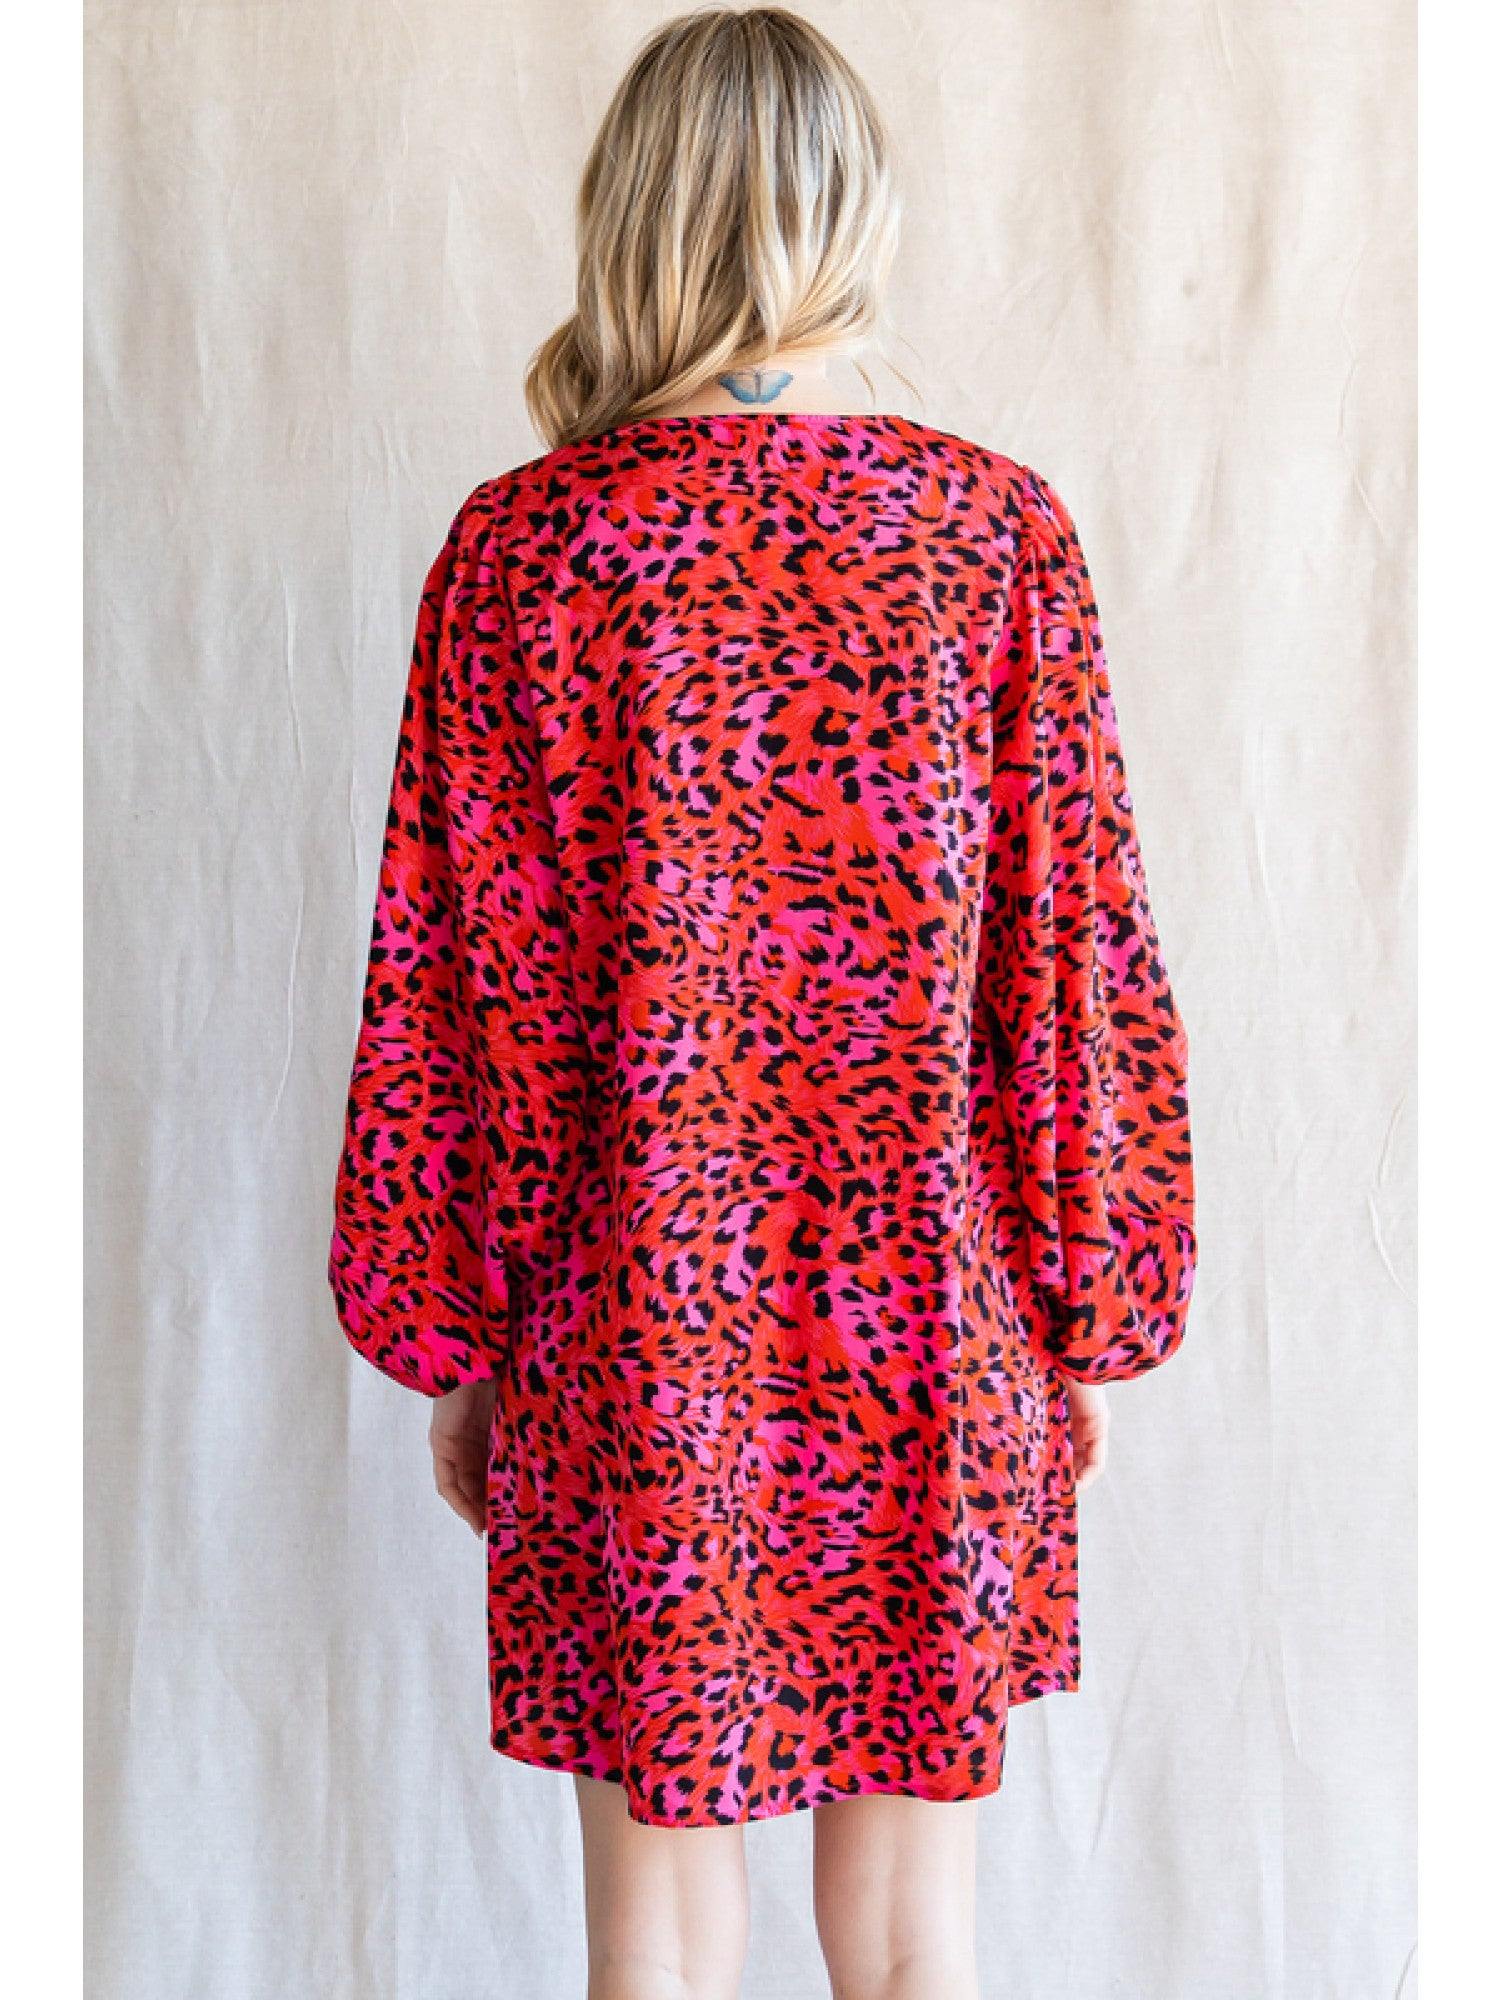 Leopard Style Steals with Red Dress Boutique - Red Soles and Red Wine